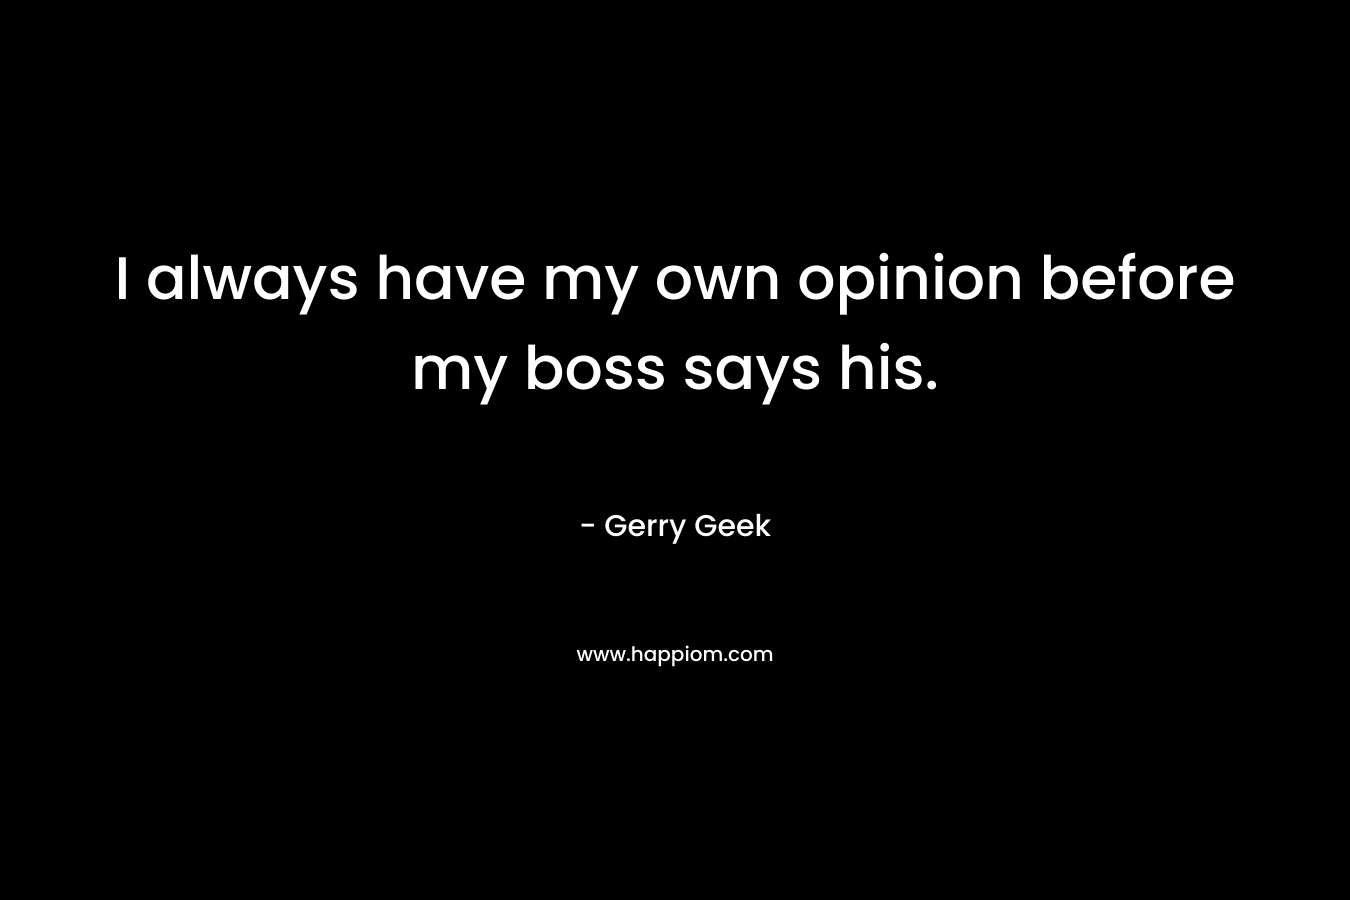 I always have my own opinion before my boss says his. – Gerry Geek